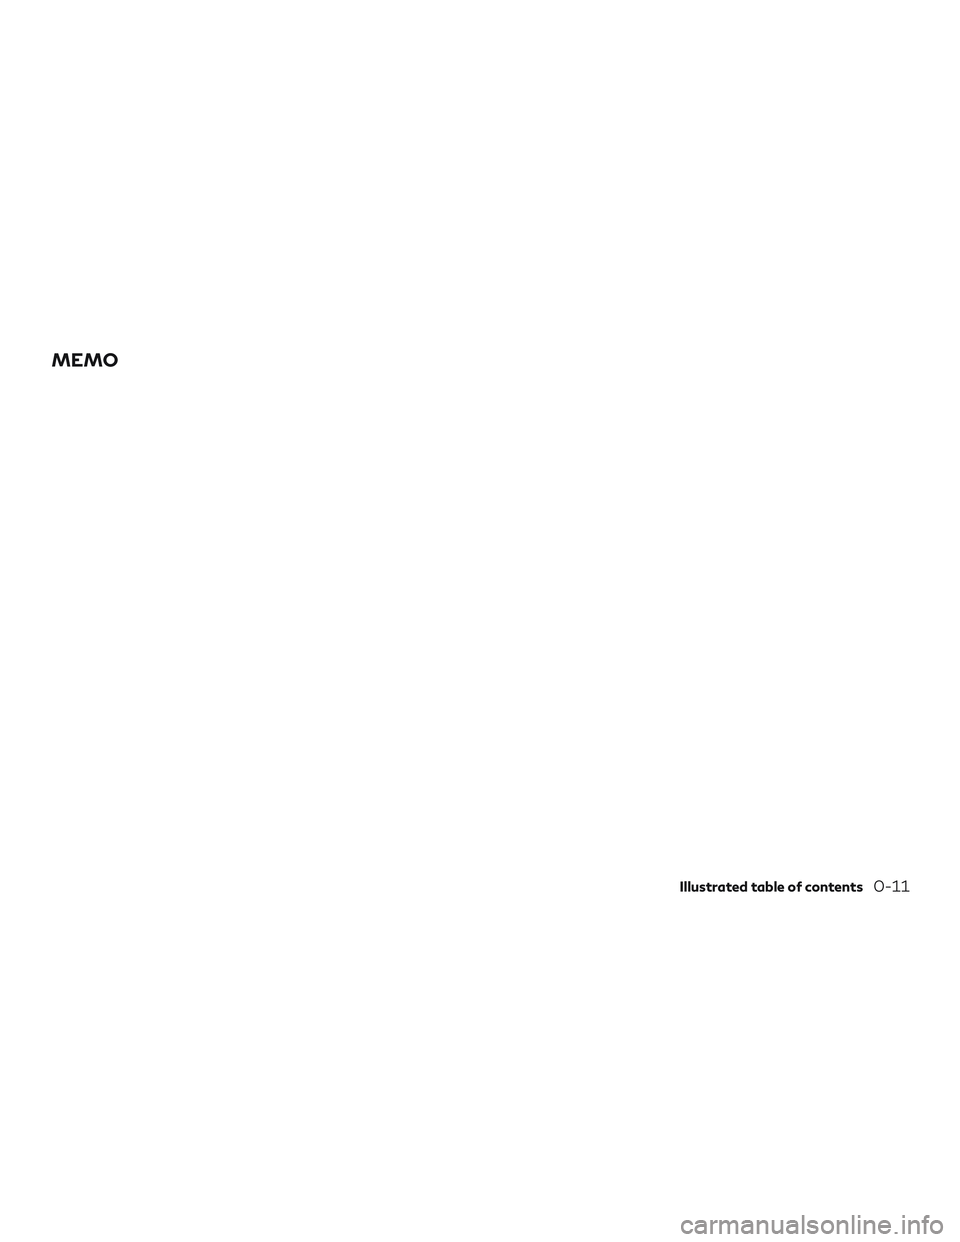 INFINITI QX60 2019 User Guide MEMO
Illustrated table of contents0-11 